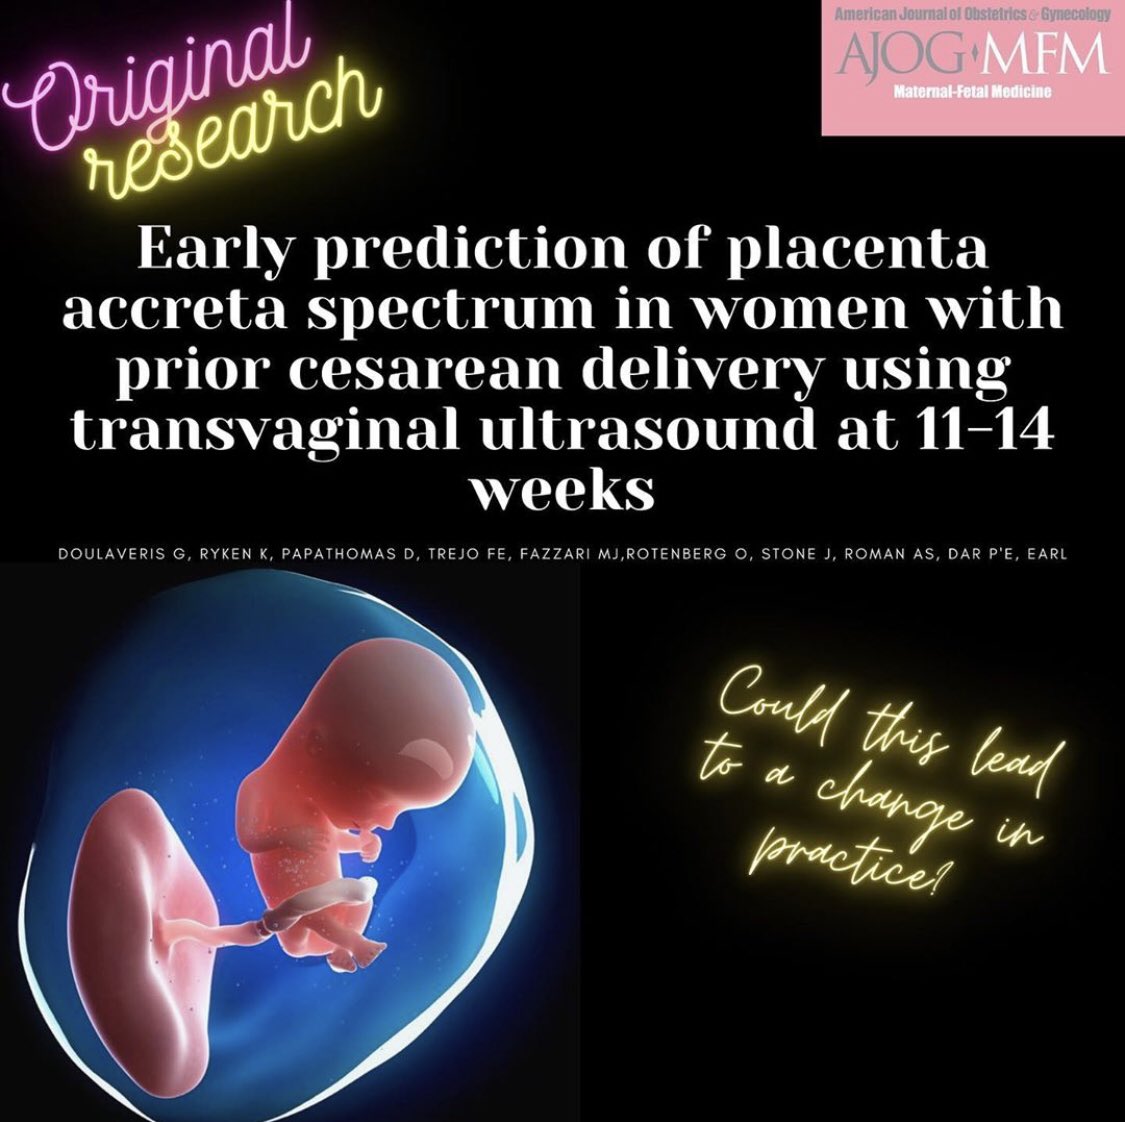 Our research on screening for #PlacentaAccreta at 11-14 weeks is now published at @ajogmfm

We created a grading tool examining the scar and placenta by transvaginal ultrasound and we were able to identify most cases

#MFMTwitter should we screen at FTS?

doi.org/10.1016/j.ajog…